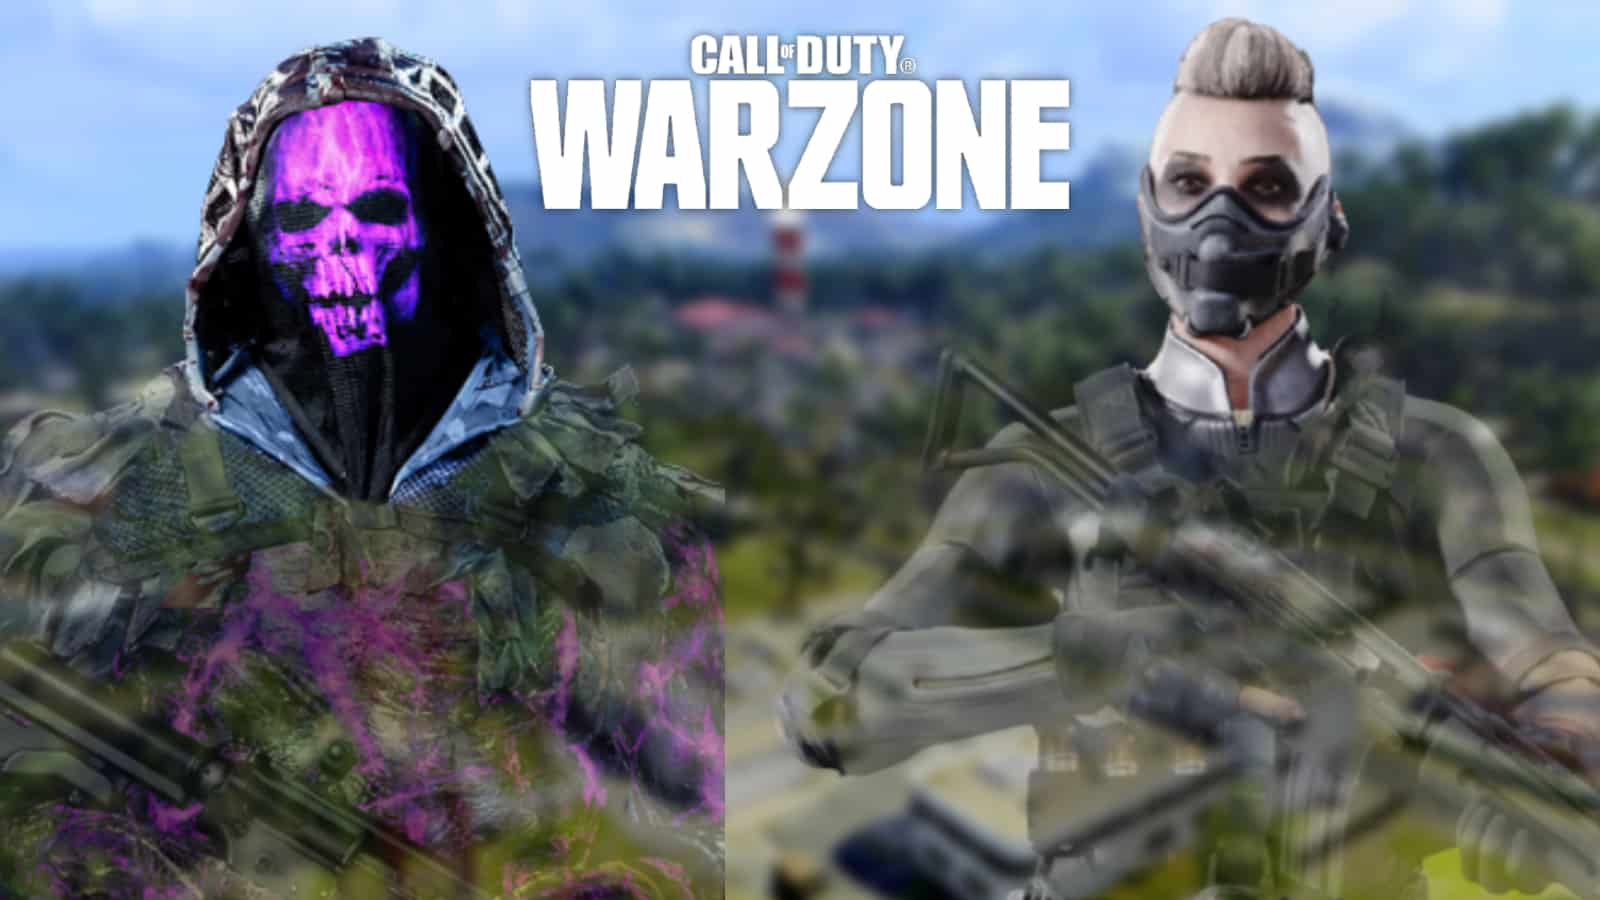 Warzone devs respond as fans discover 2 new invisible skins